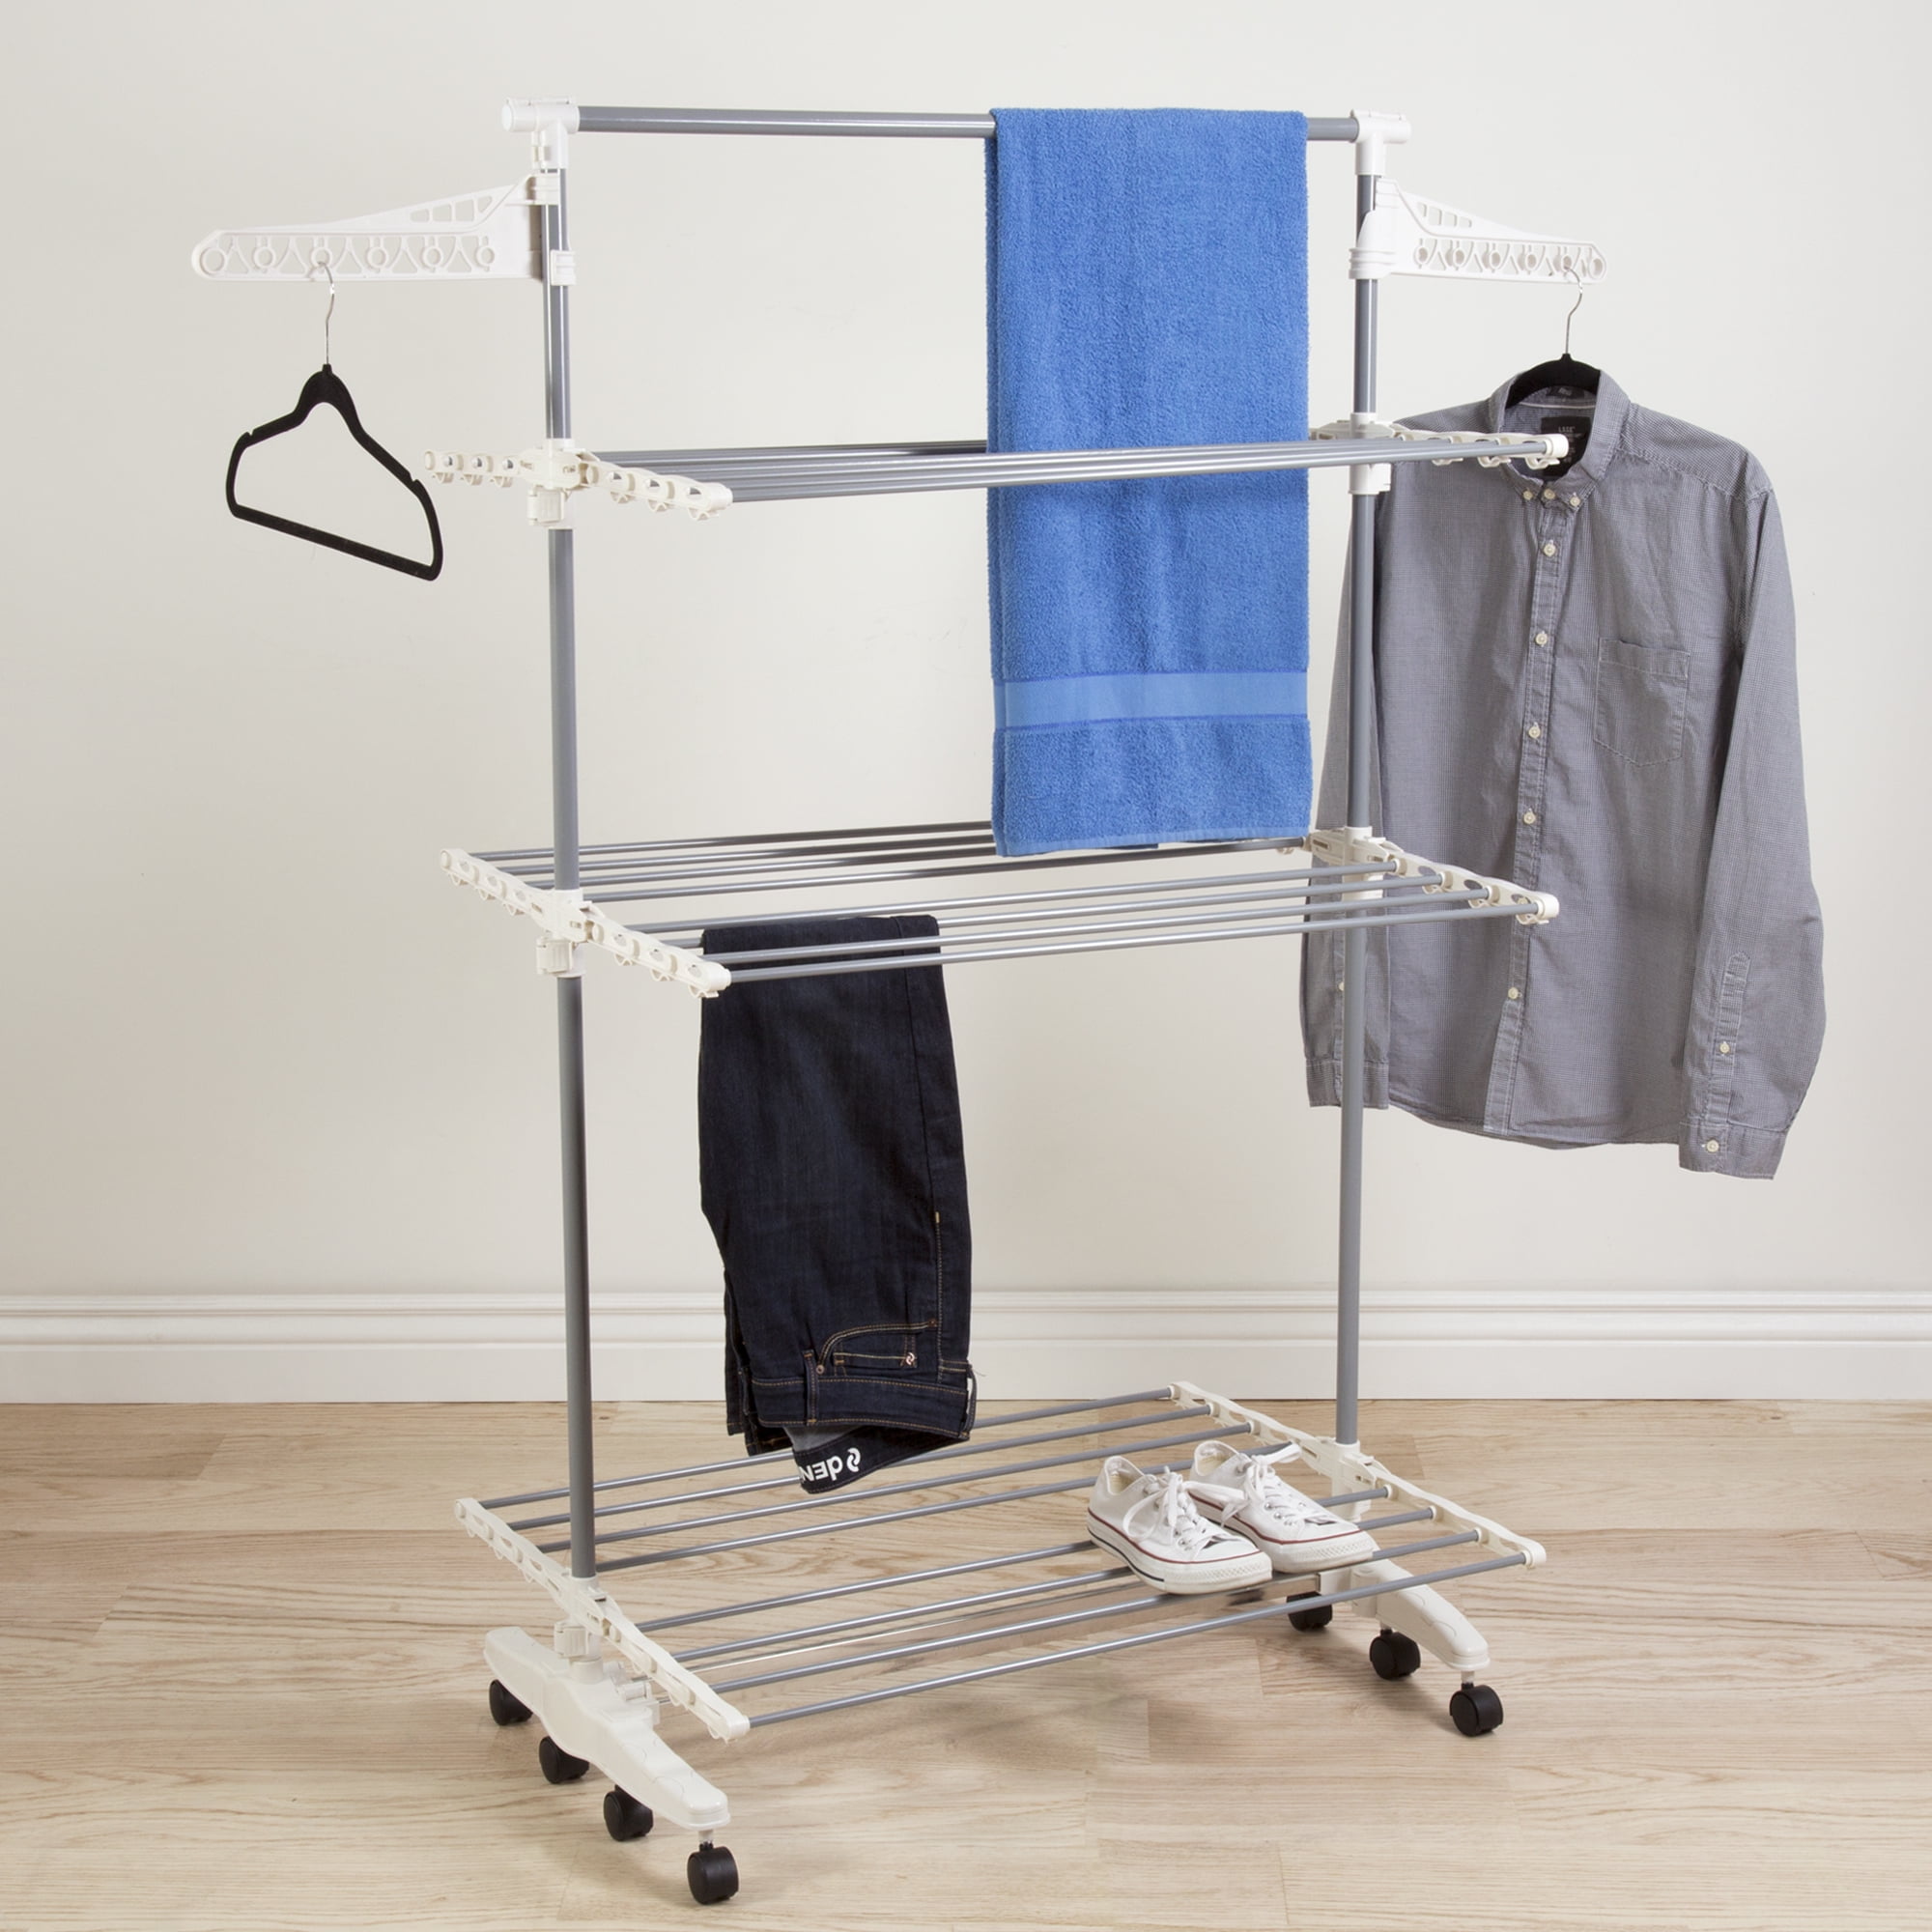 FREE POSTAGE! 3 TIER CLOTHES TOWEL LAUNDRY AIRER DRYER INDOOR OUTDOOR HOME